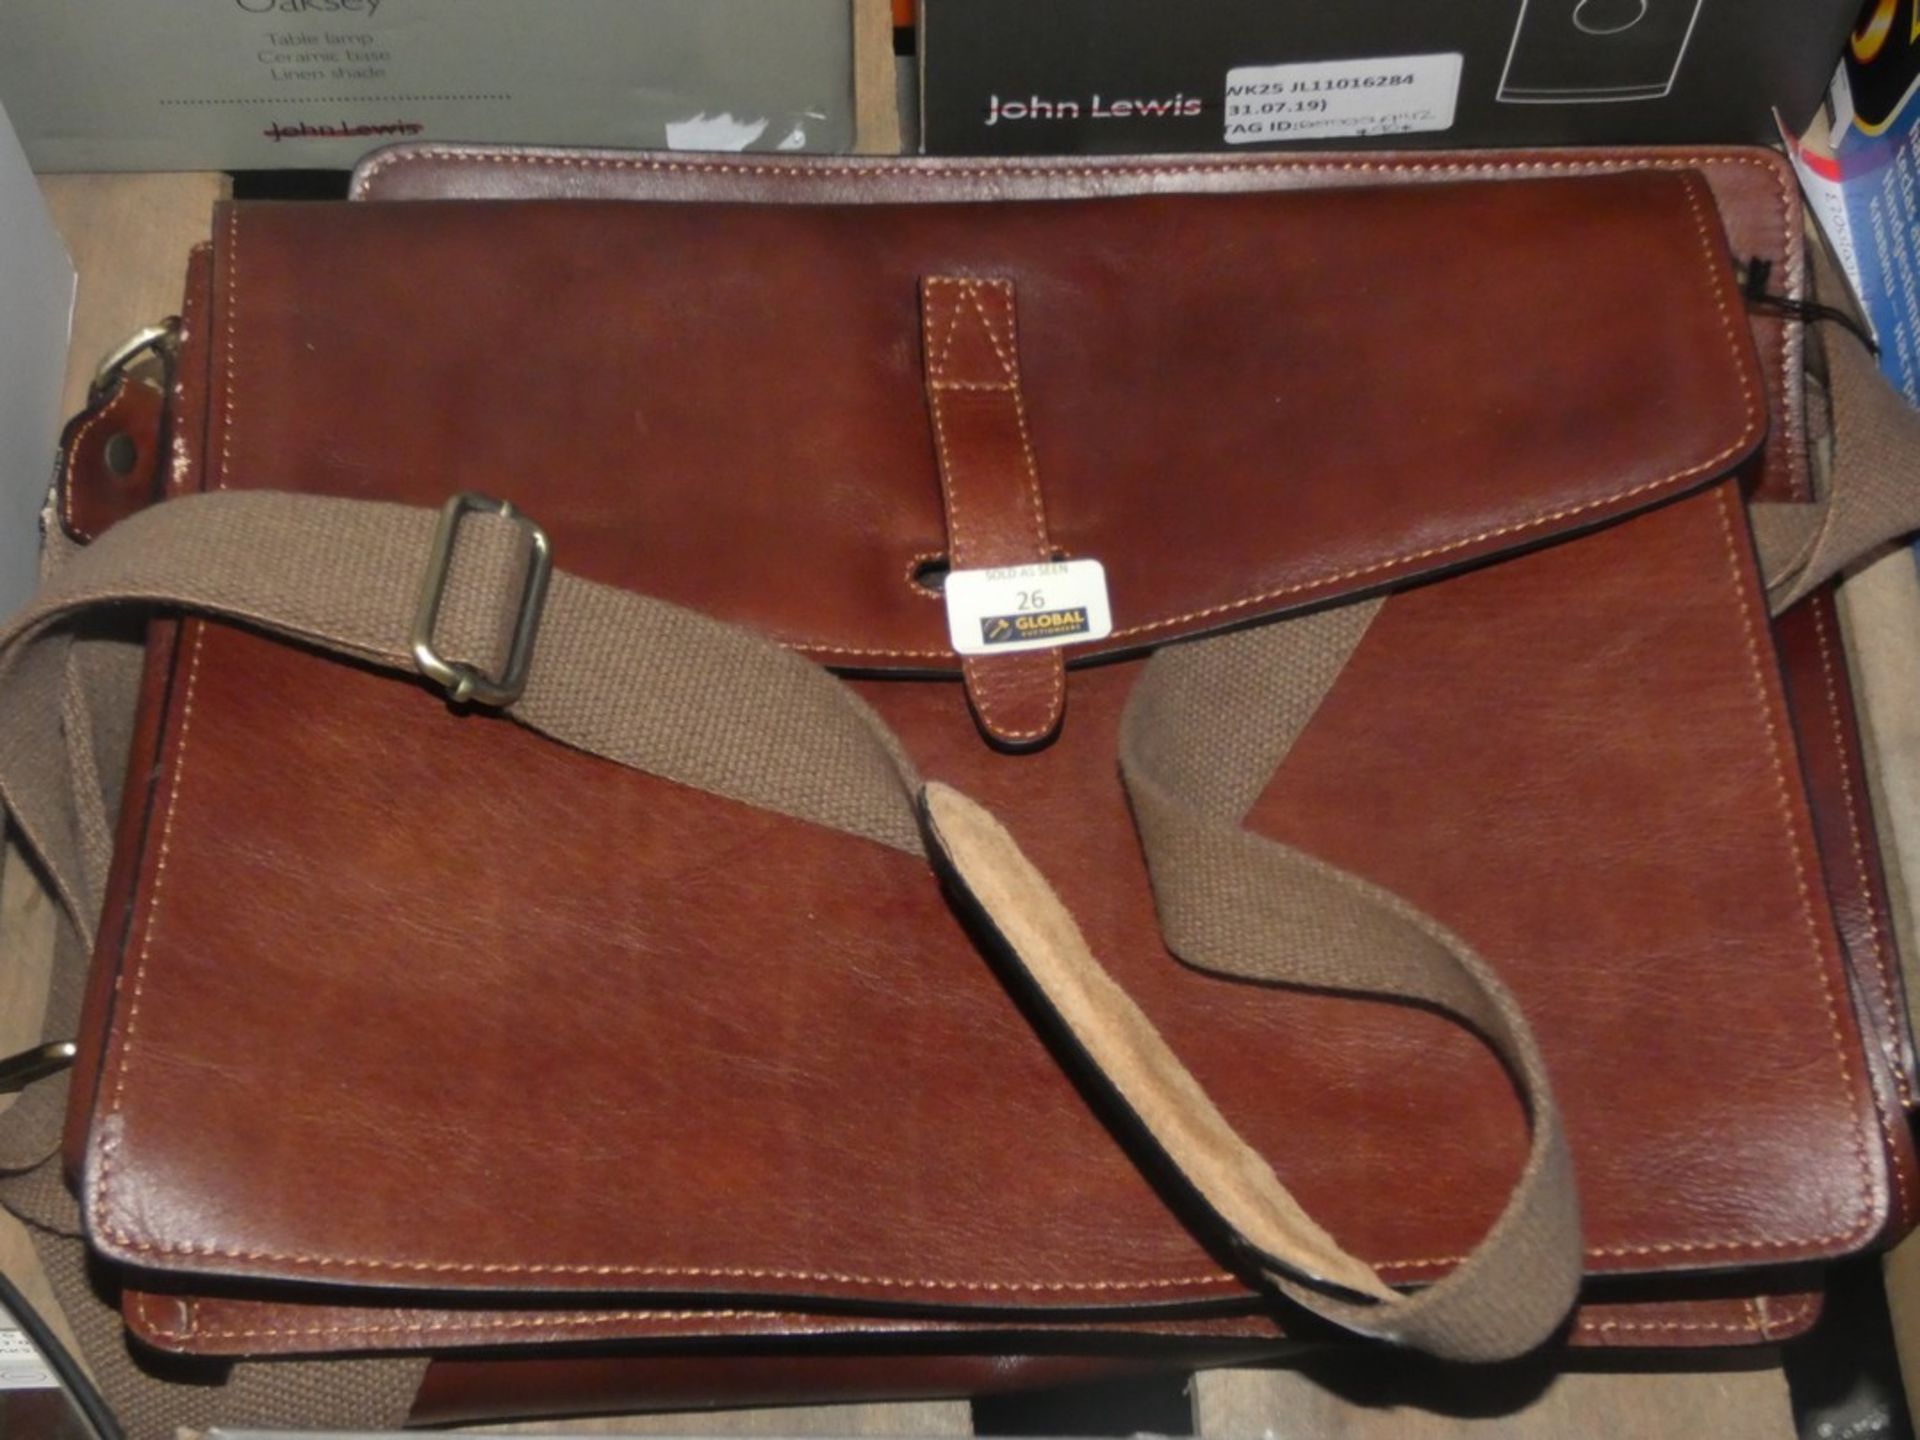 Tan Leather John Lewis And Partners Designer Satchels RRP £115 Each (RET00355023) (Viewings And